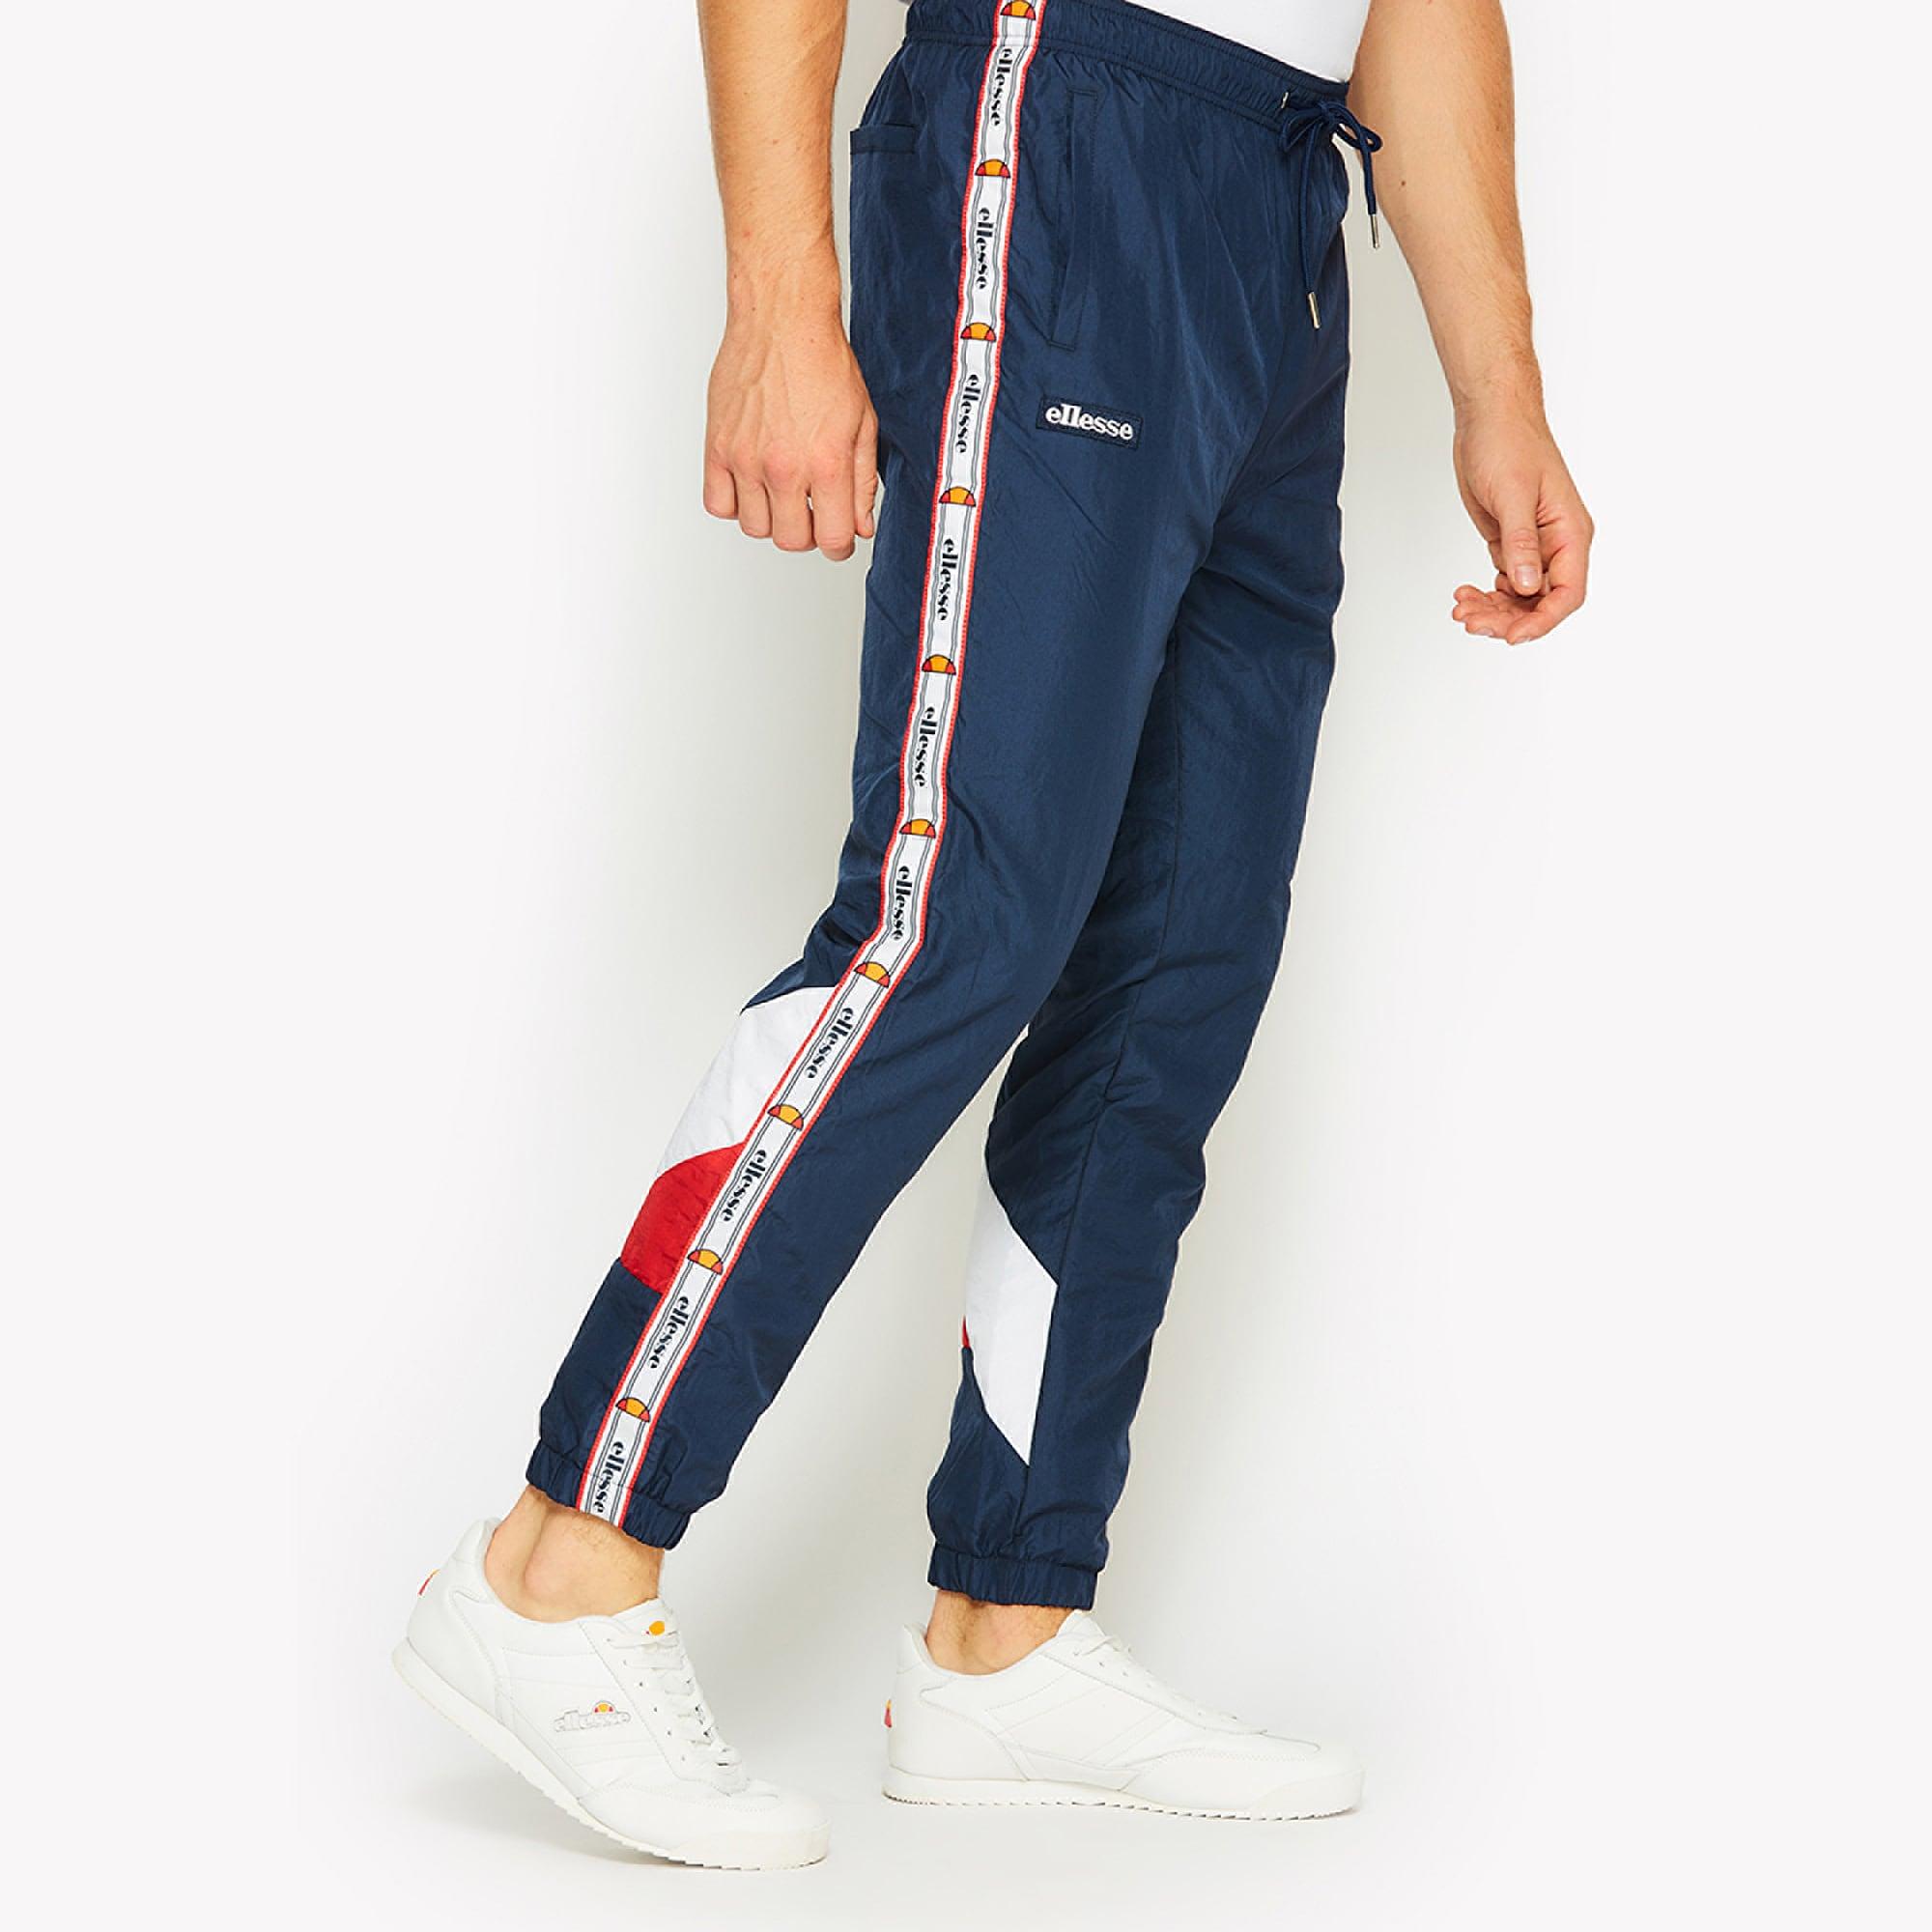 Ellesse Synthetic Avico Track Pants in 